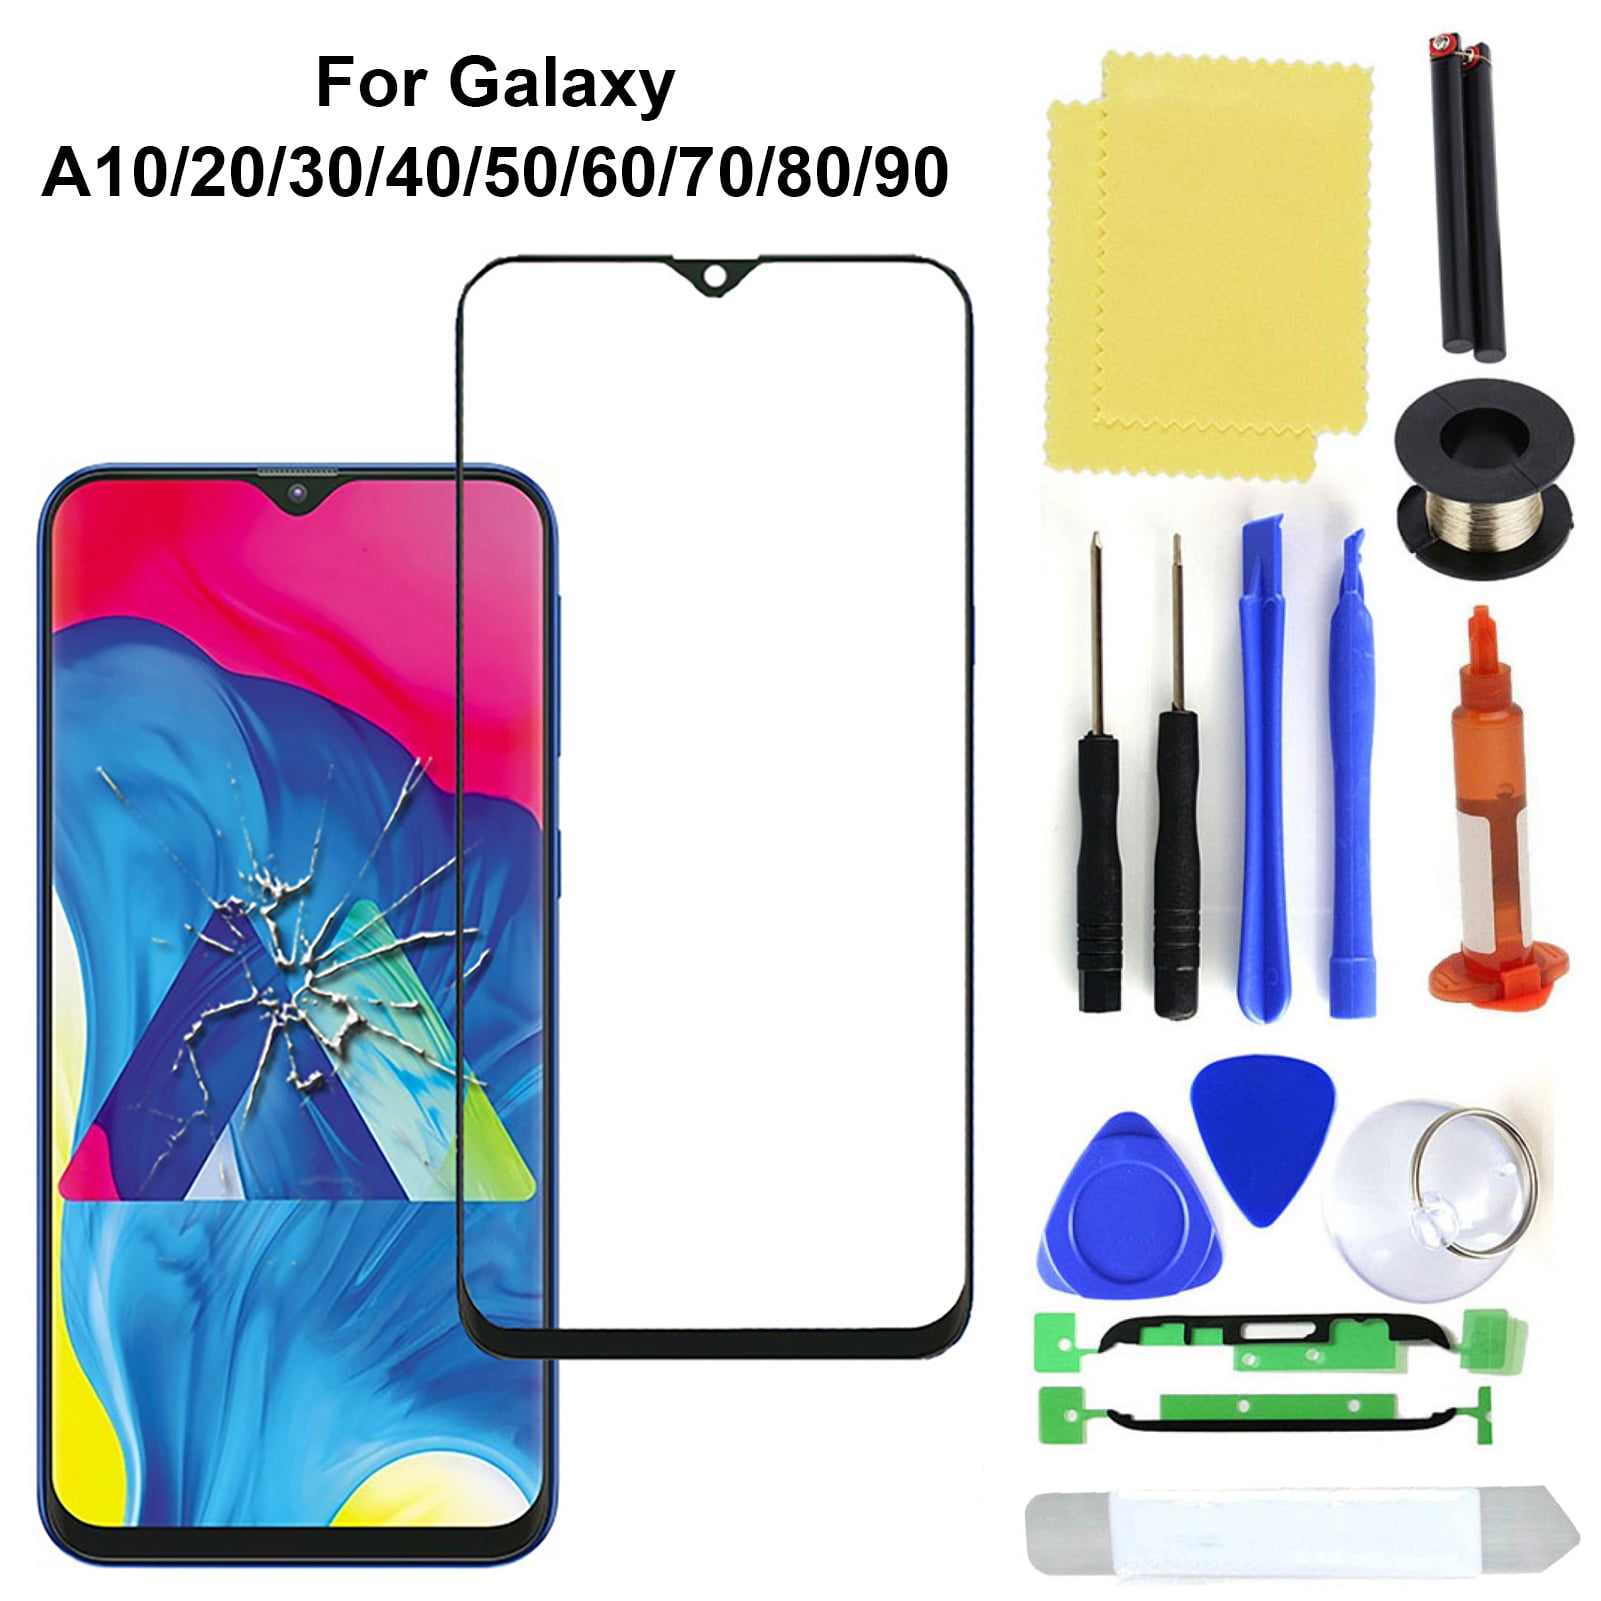 Premium Screen Replacement for iPhone 11 Pro MAX (6.5 inch) Model A2161,  A2220, A2218-3D Touch Screen Repair kit, Display Digitizer with Waterproof